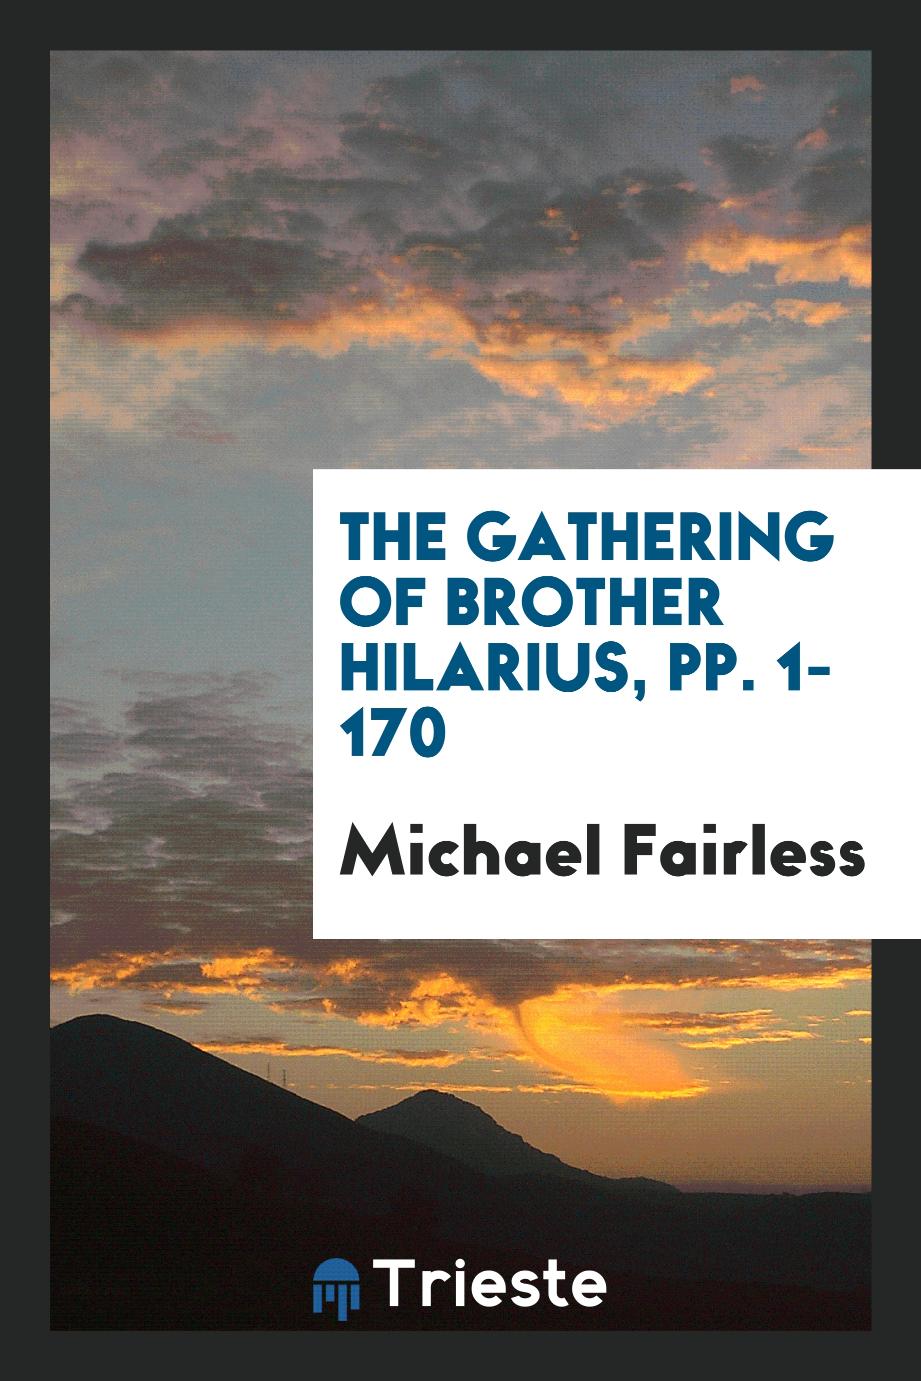 The Gathering of Brother Hilarius, pp. 1-170